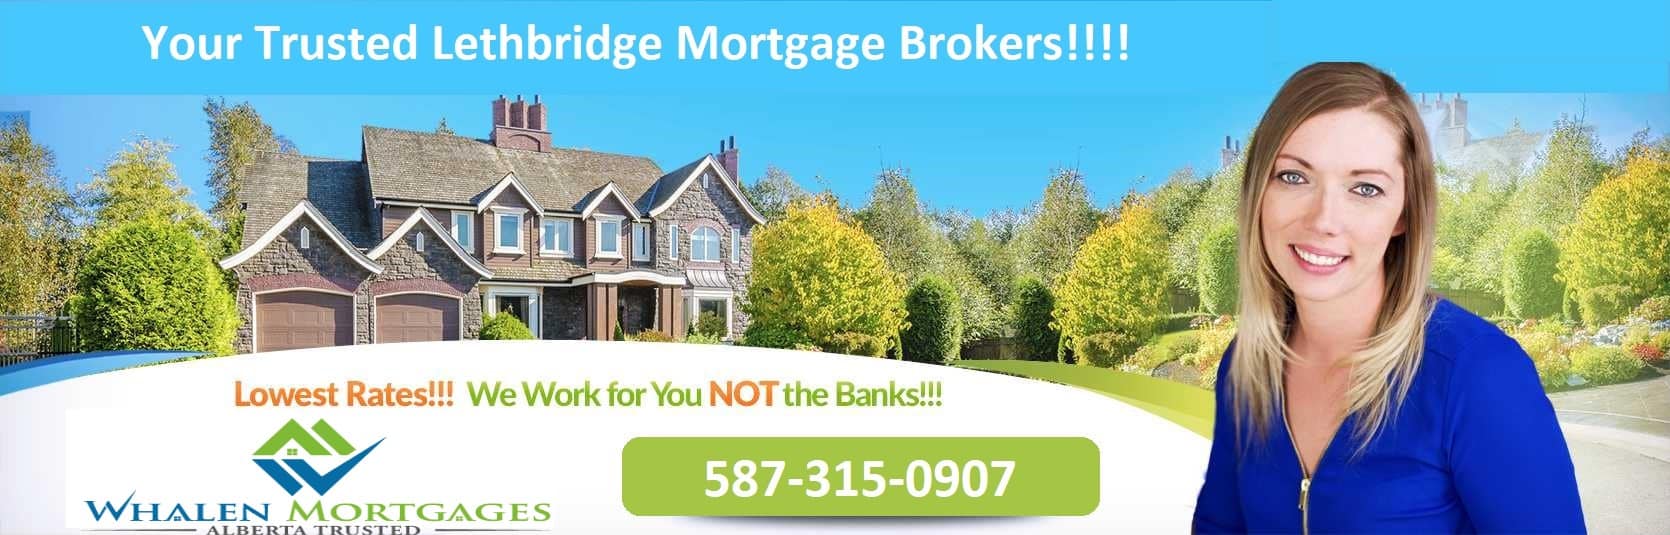 2 year fixed mortgage rates lowest in Lethbridge